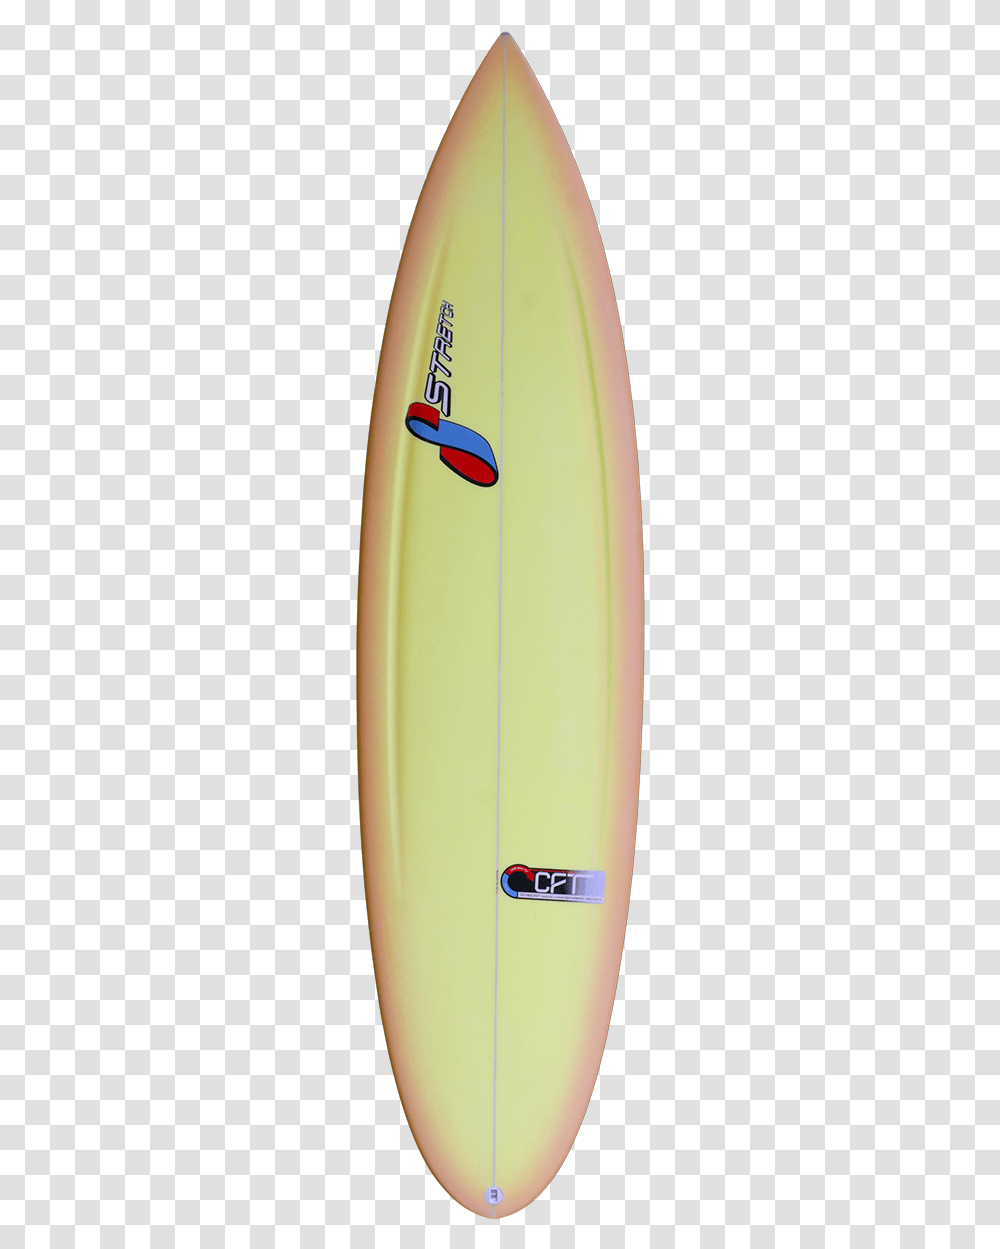 Step Up Surfboard Surfboard, Sea, Outdoors, Water, Nature Transparent Png